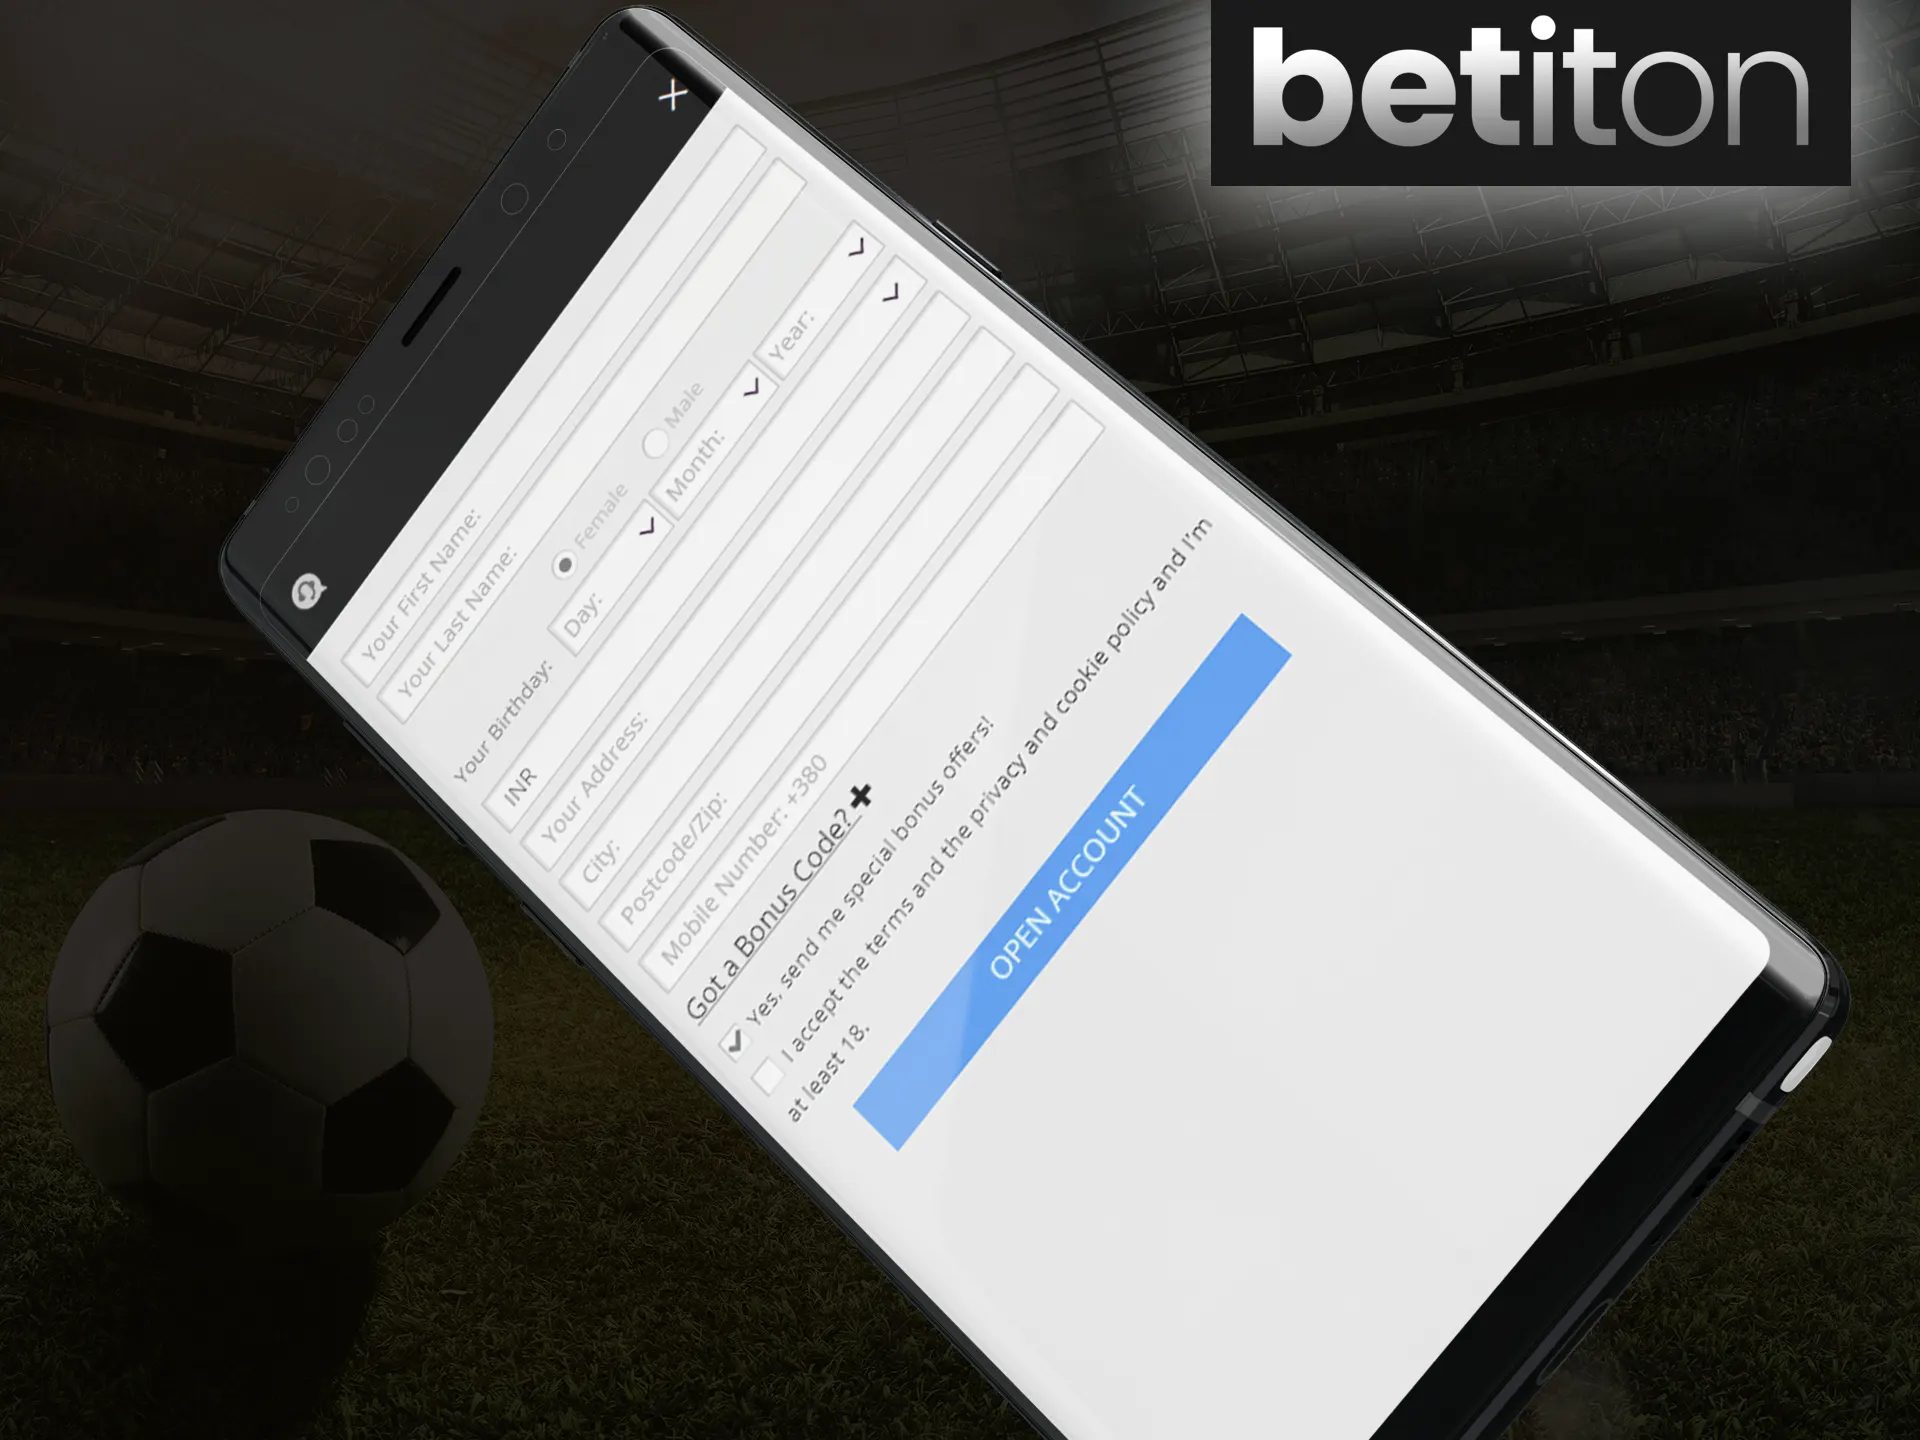 Register a new Betiton account quicker with the app.